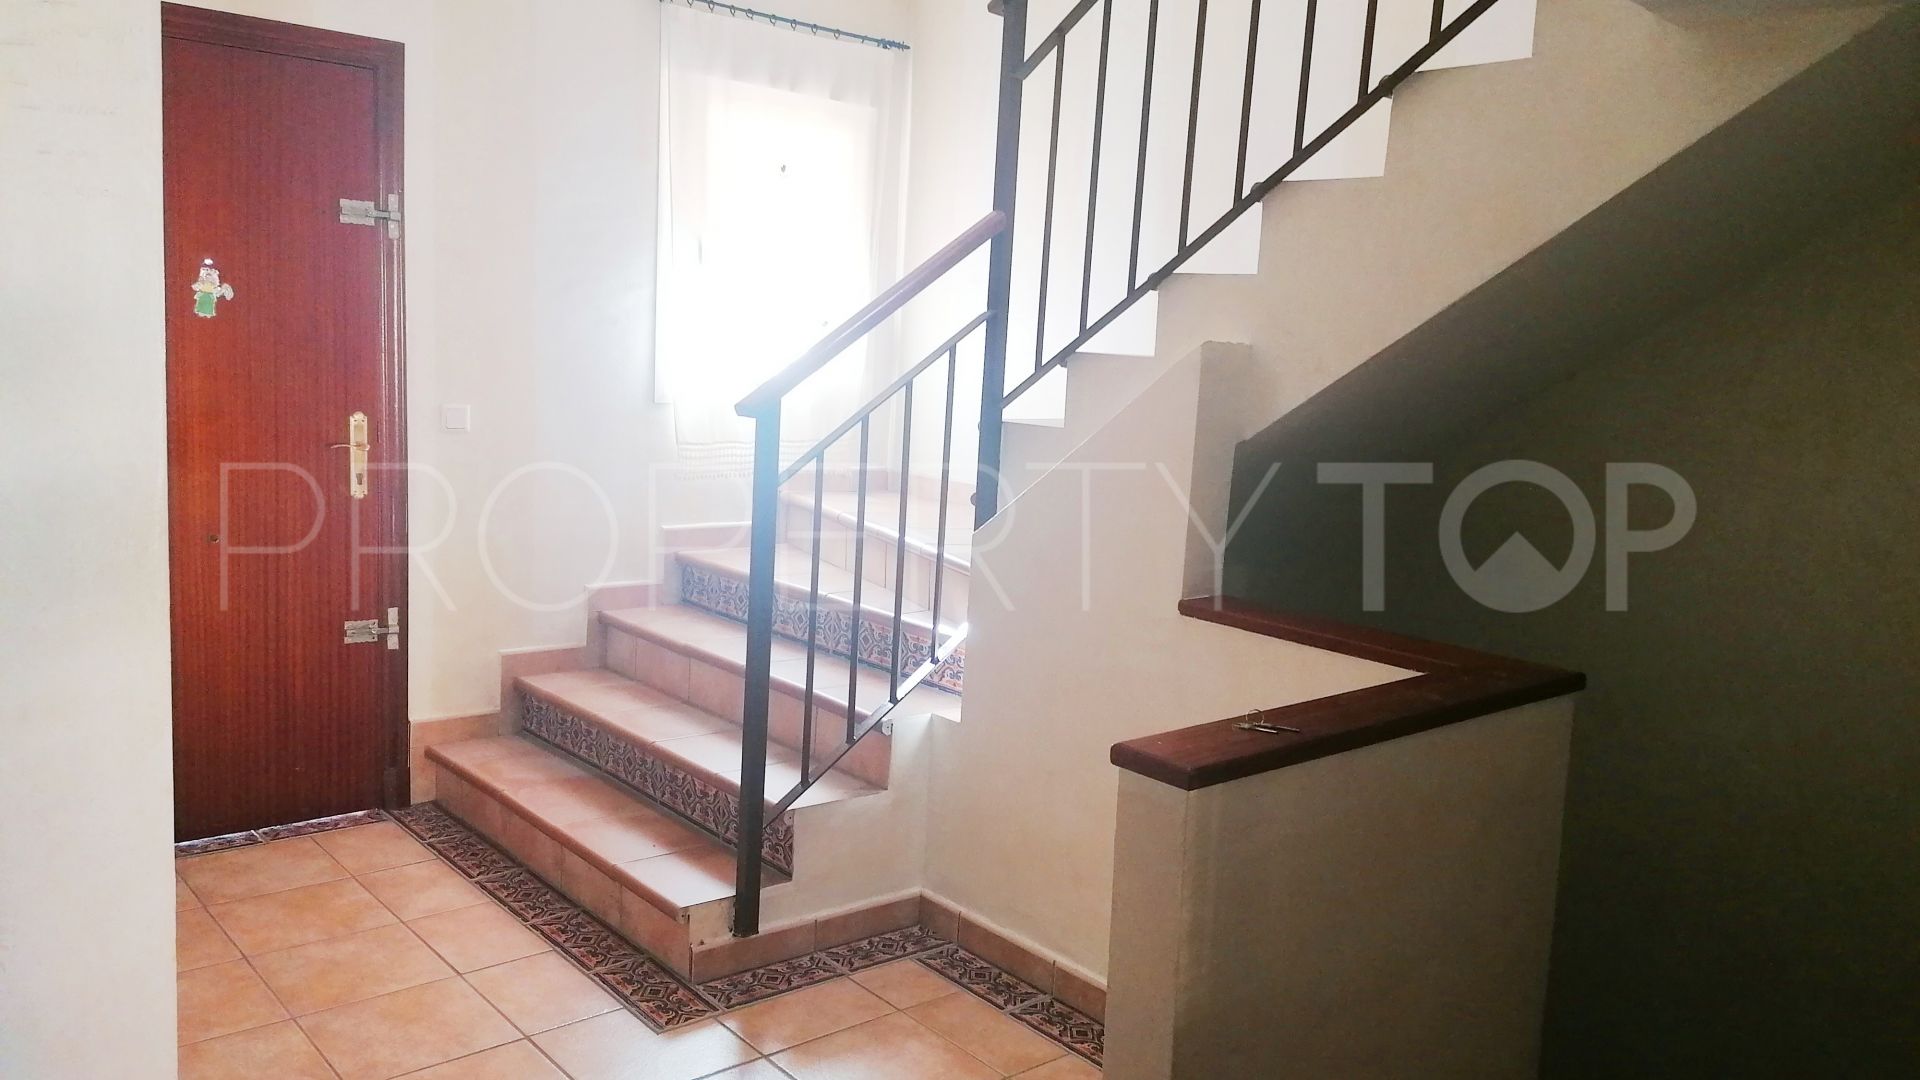 Town house for sale in Sotoserena with 4 bedrooms